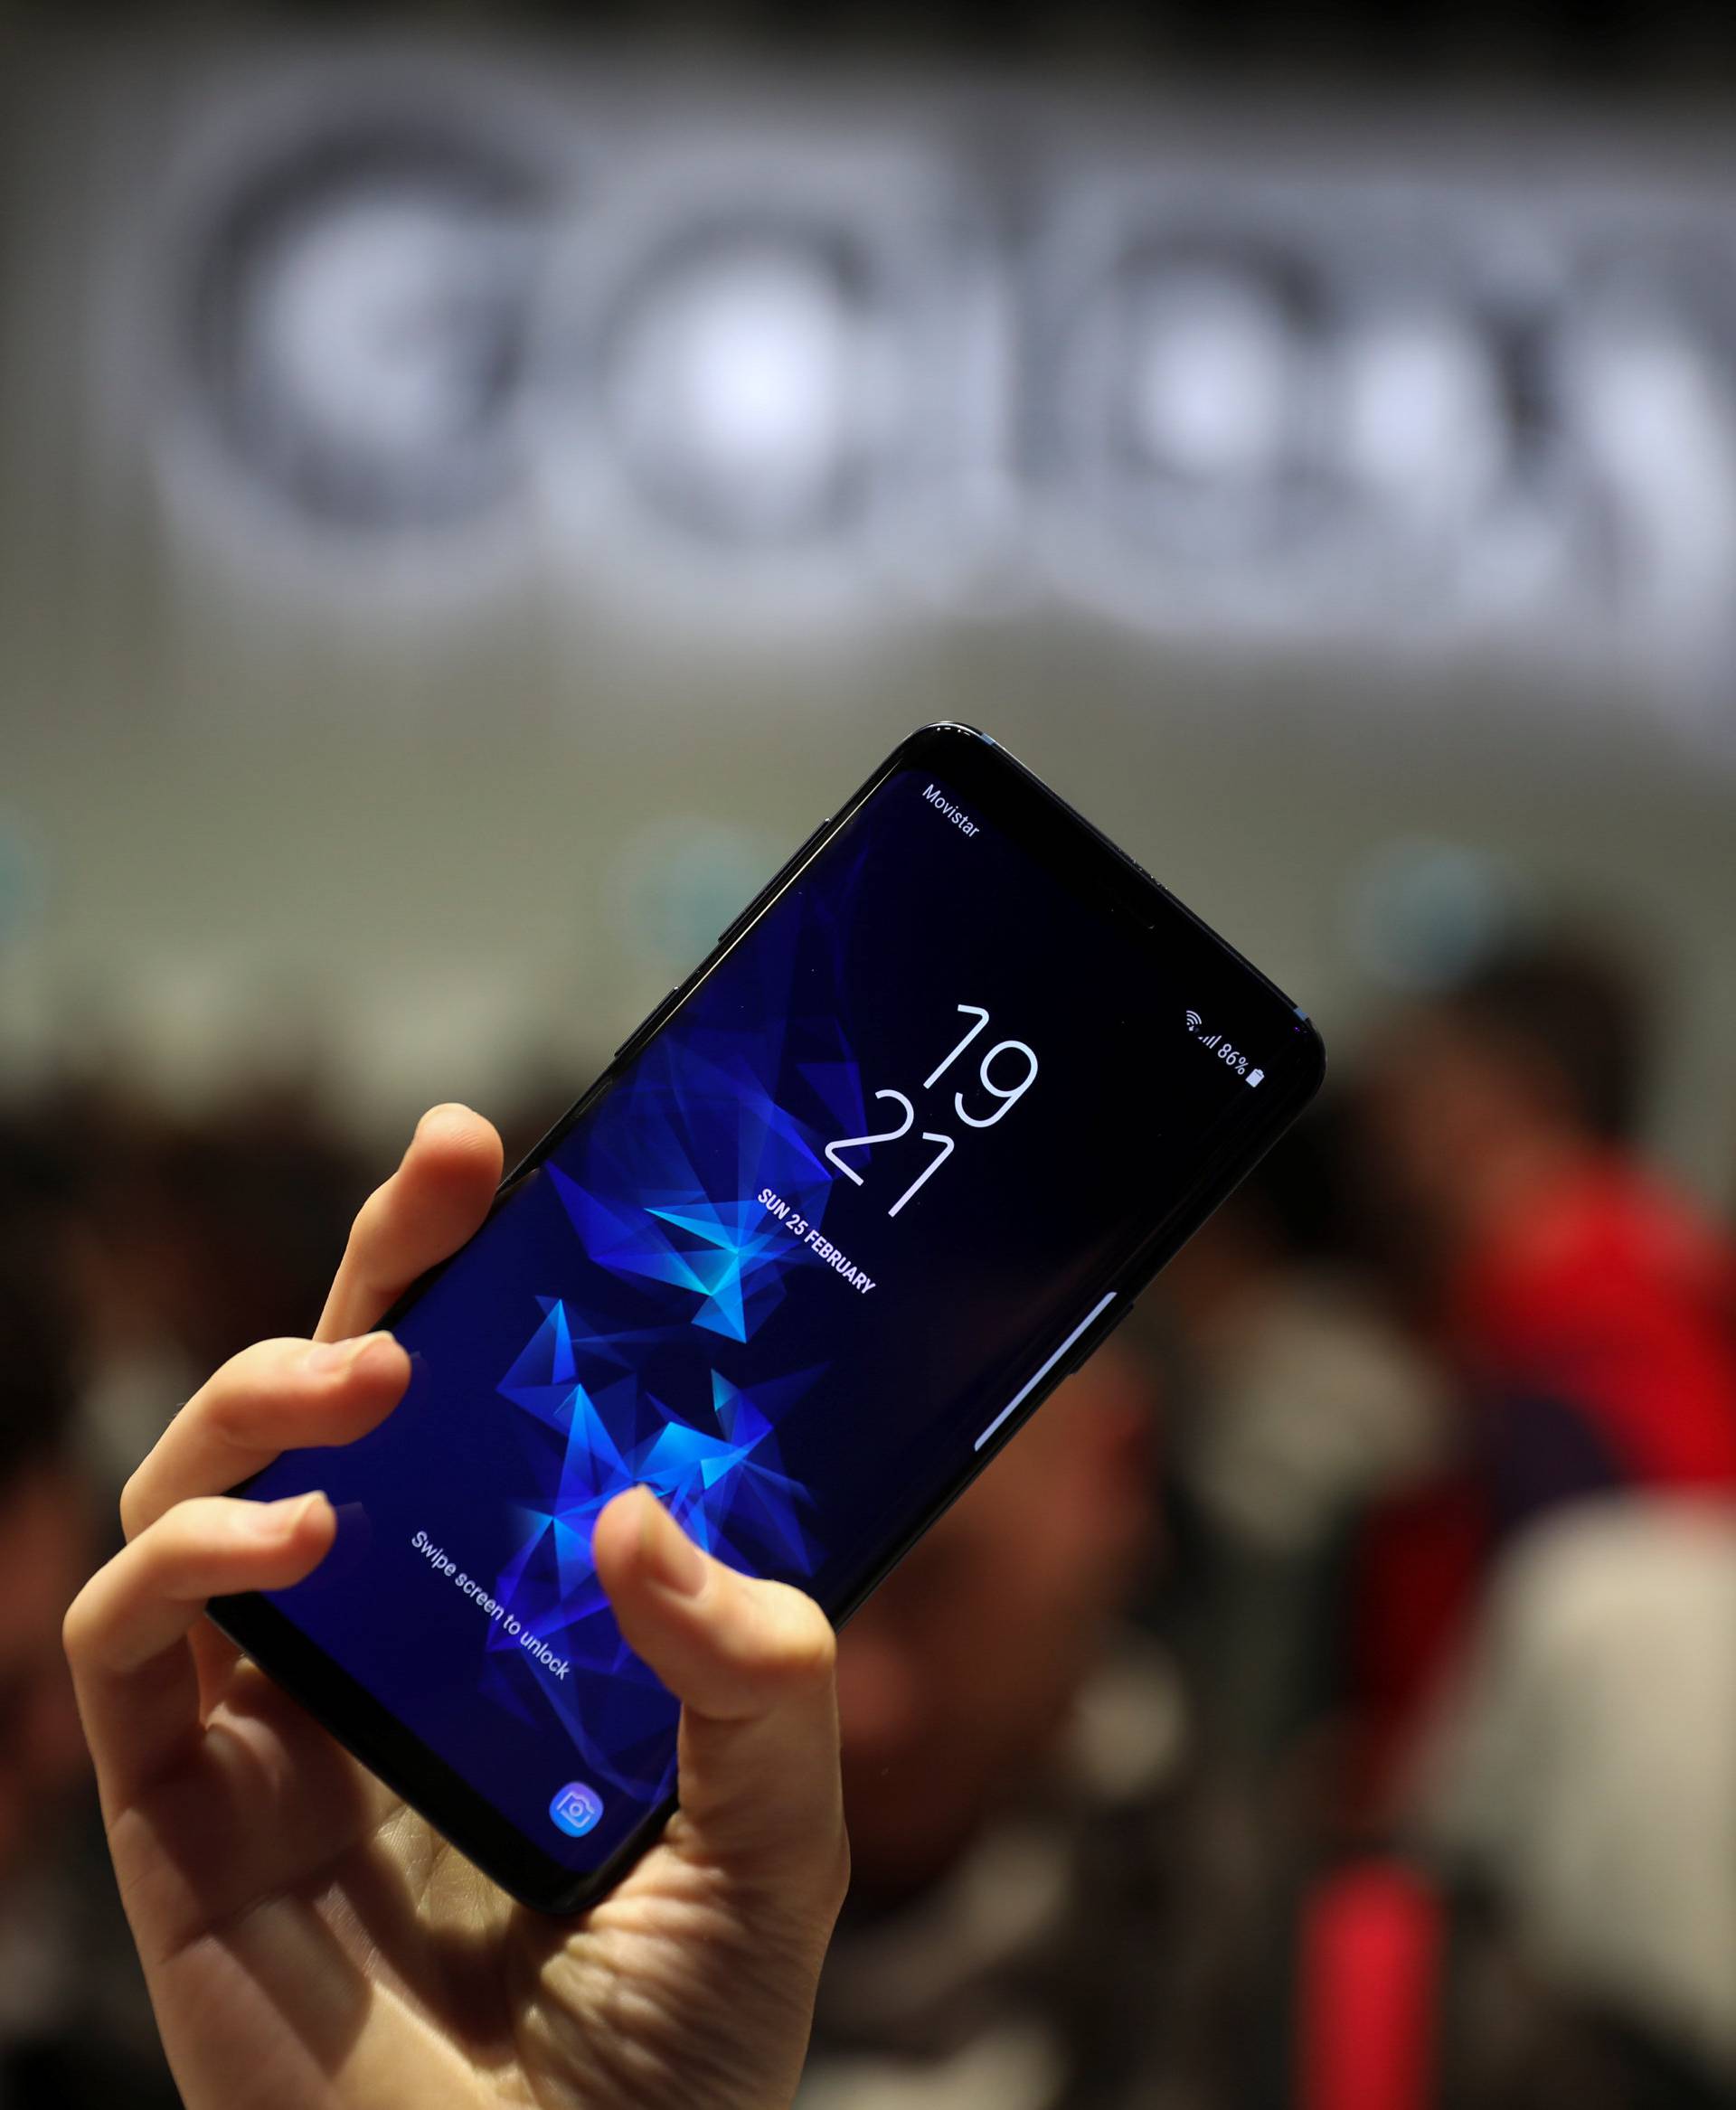 A hostess shows up Samsung's new S9 device after a presentation ceremony at the Mobile World Congress in Barcelona